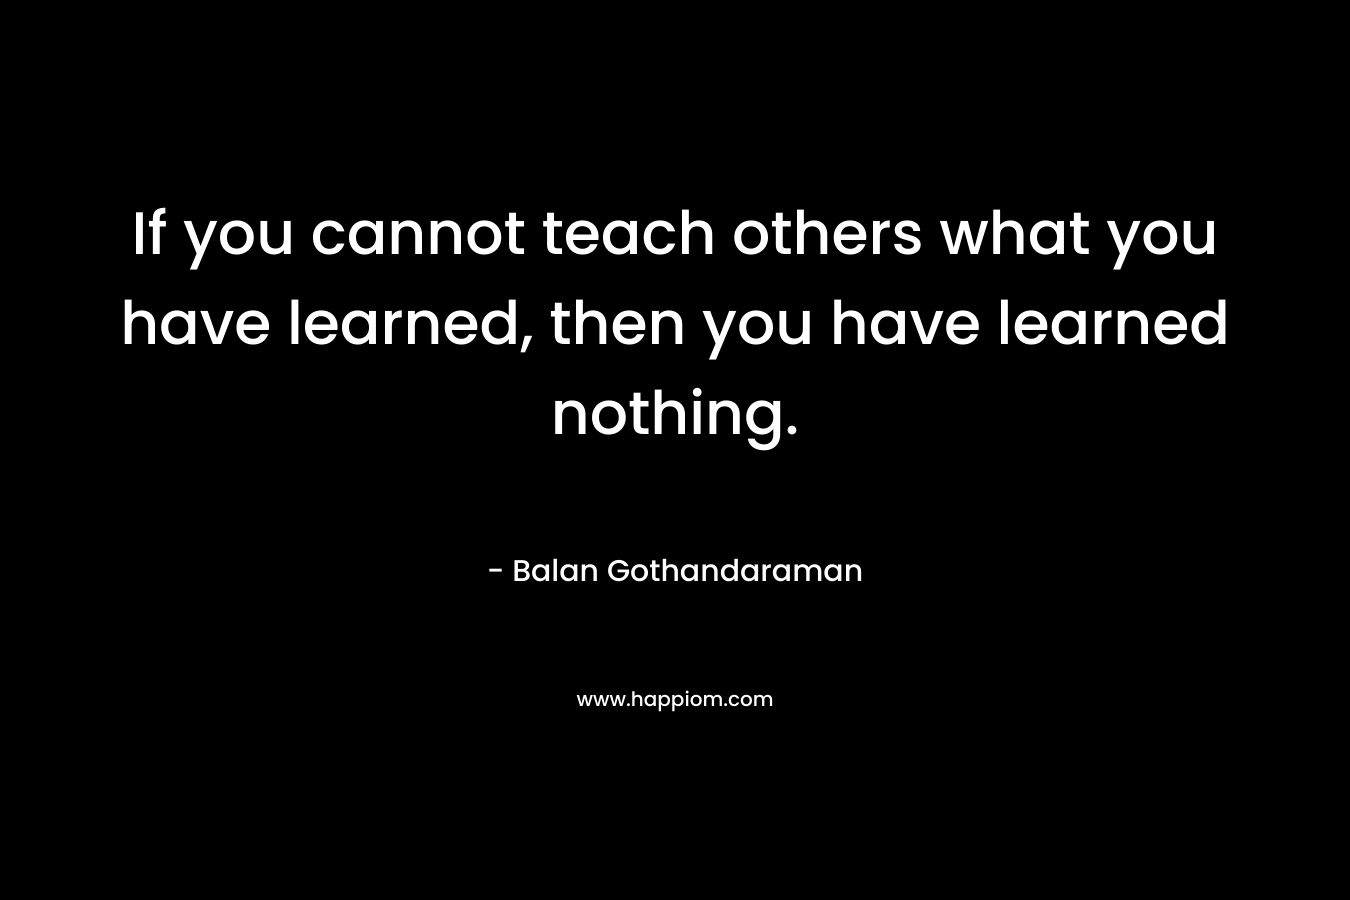 If you cannot teach others what you have learned, then you have learned nothing.